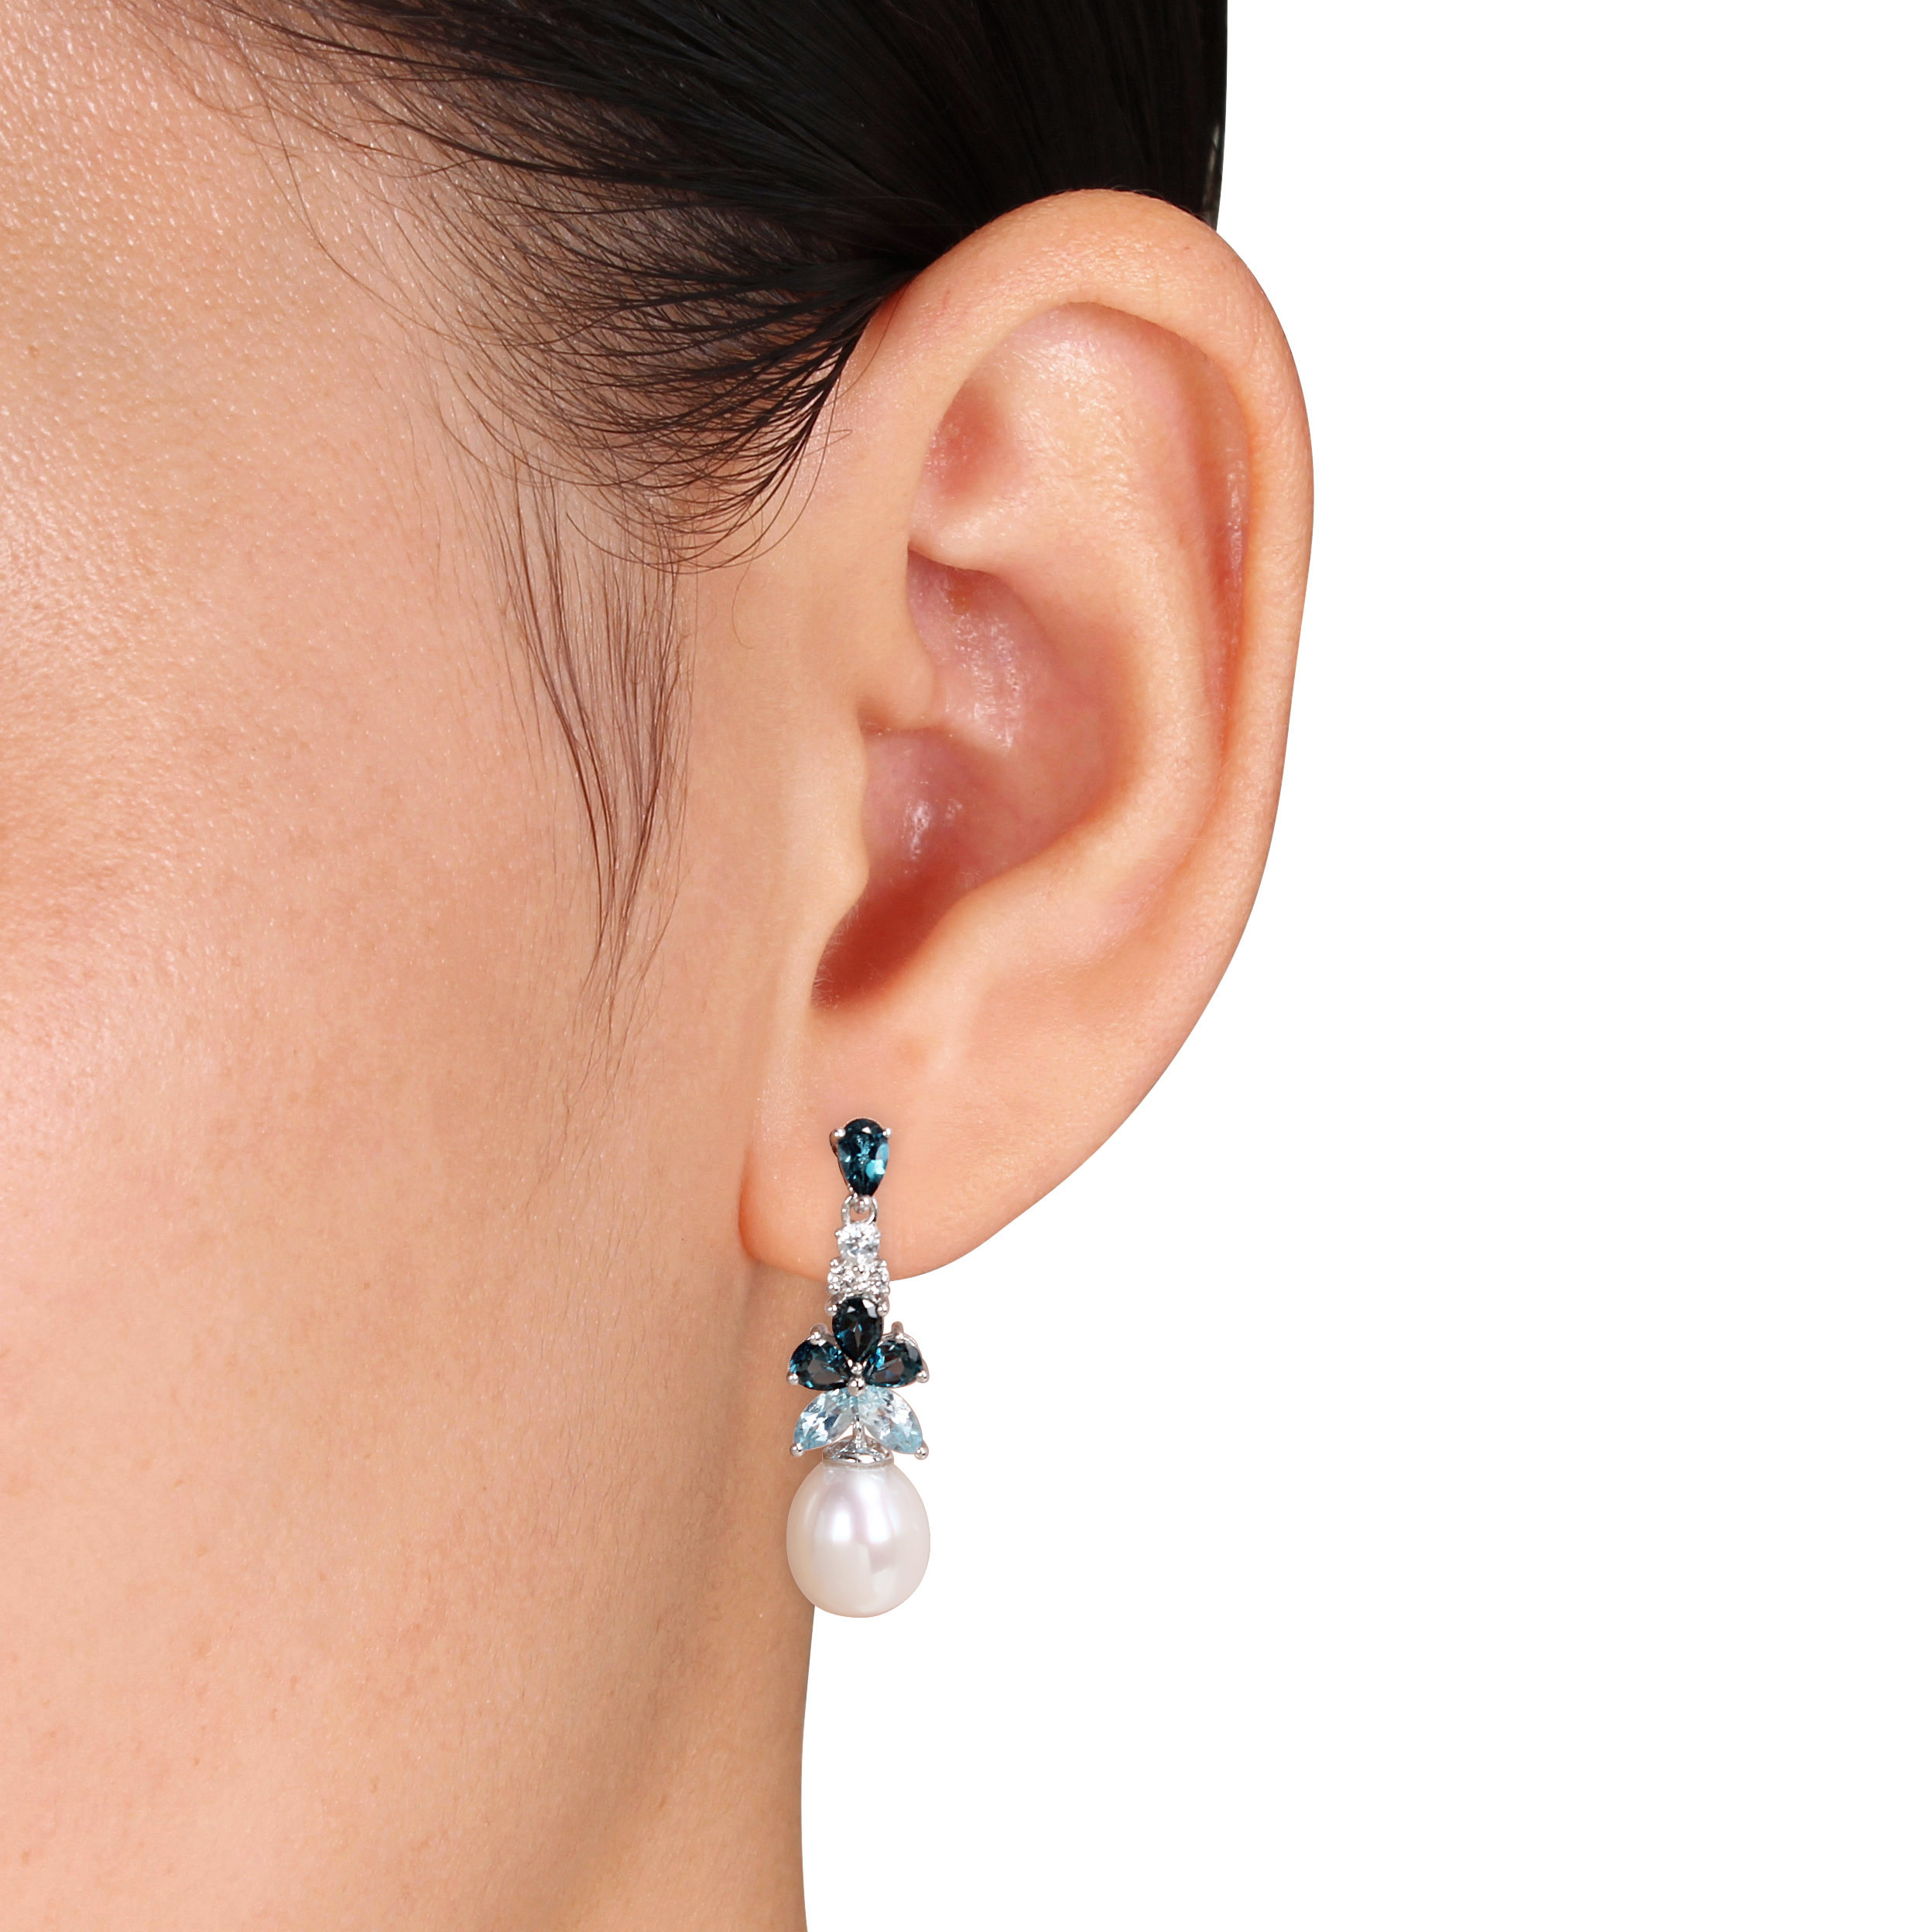 8.5 - 9 MM White Cultured Freshwater Pearl and London, Sky Blue and White Topaz Drop Earrings in Sterling Silver